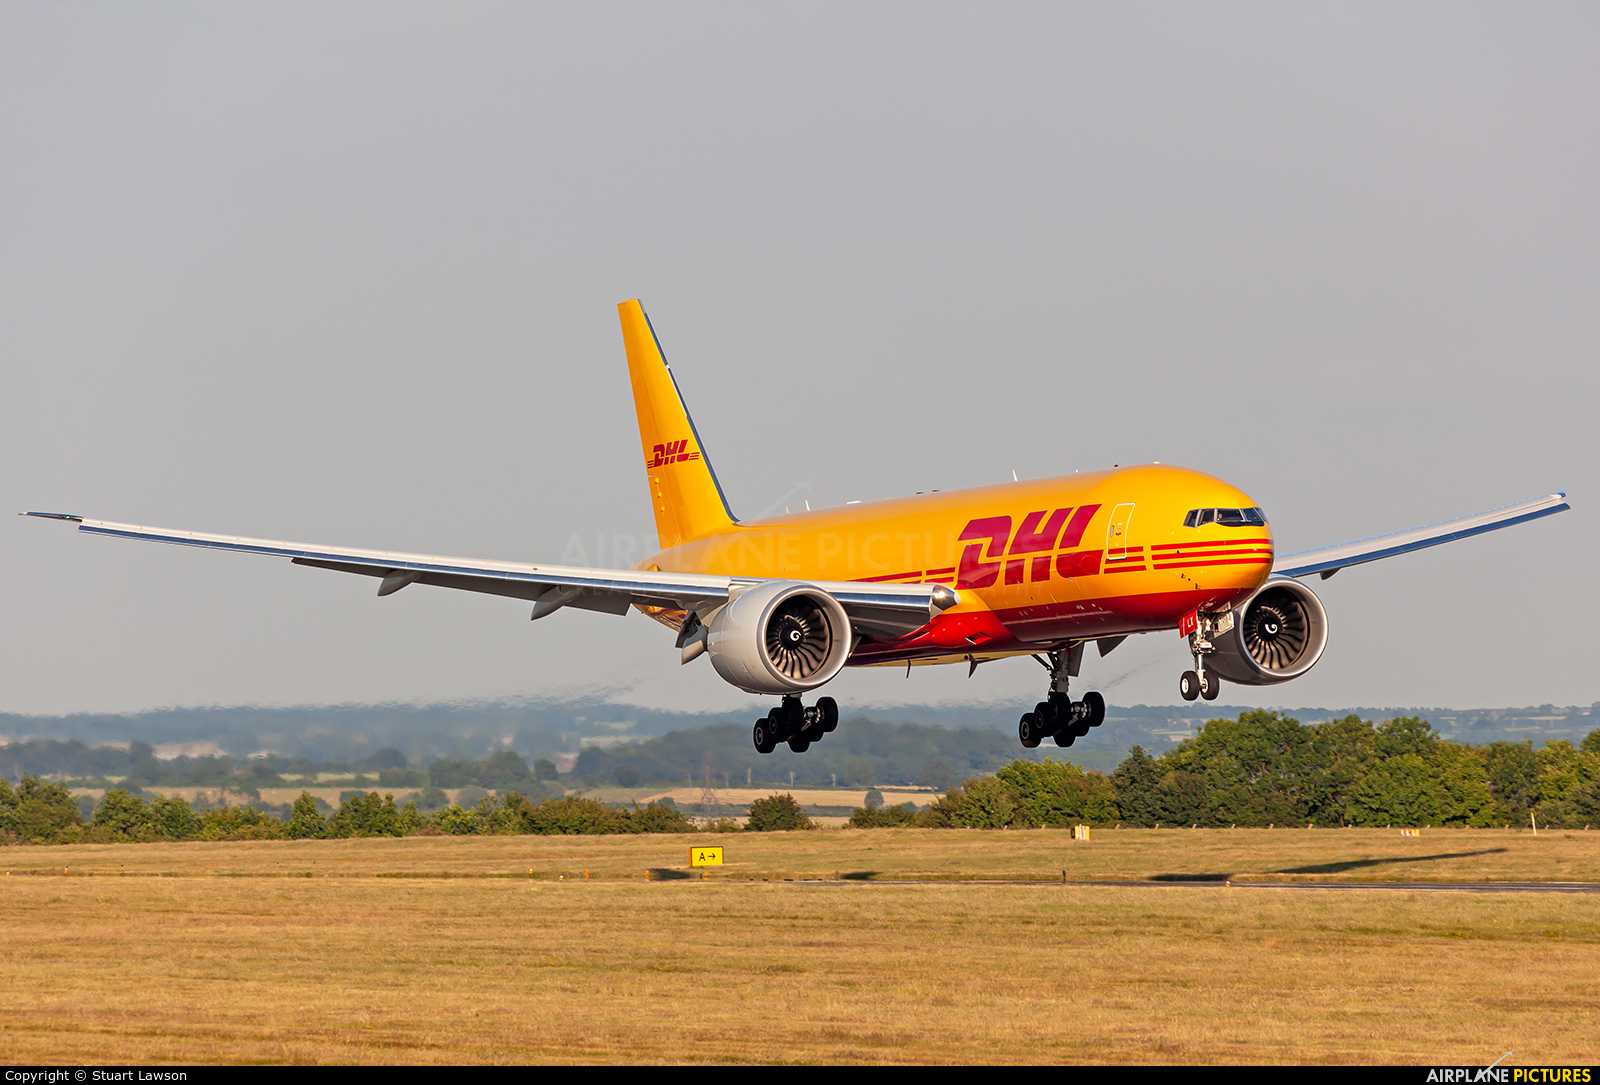 DHL Cargo G-DHLX aircraft at East Midlands